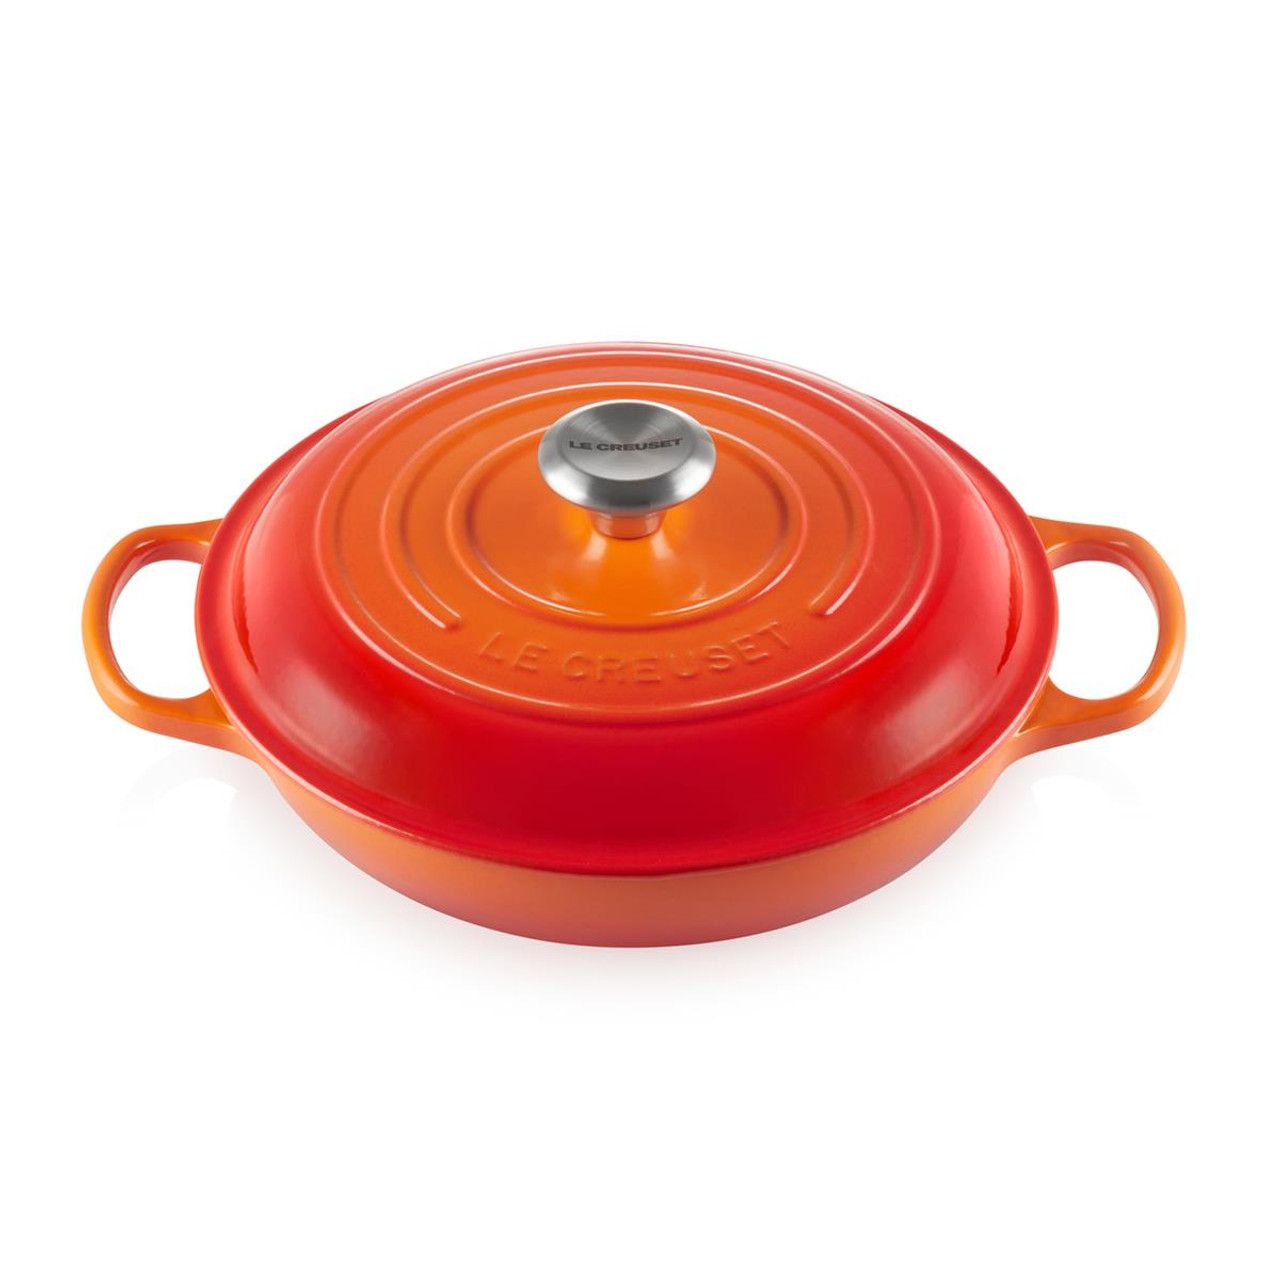 Which heat sources are compatible with the Le Creuset 26cm cast iron casserole dish?